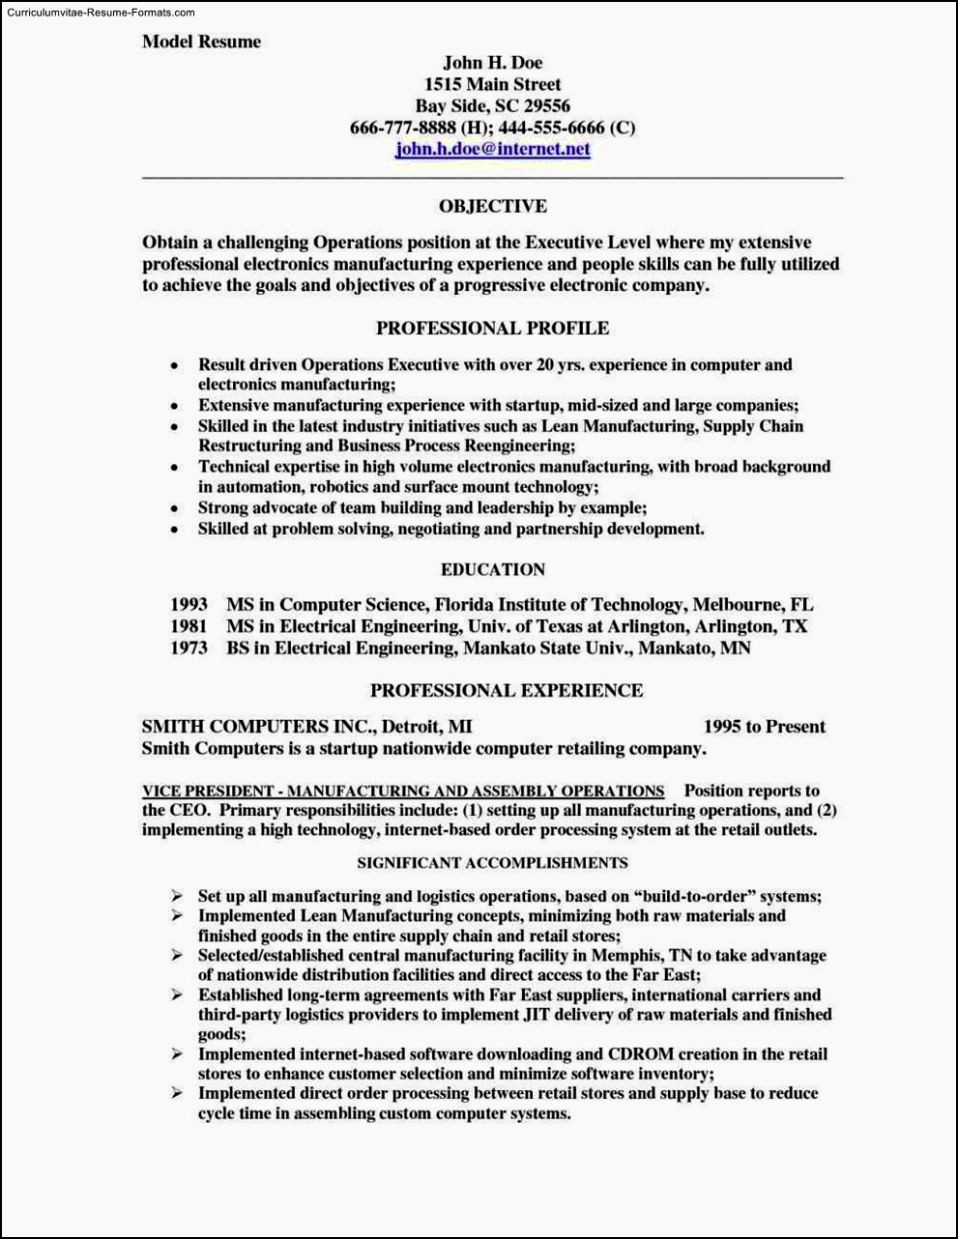 Resume Examples In Word format Awesome Download Model Resume Word format